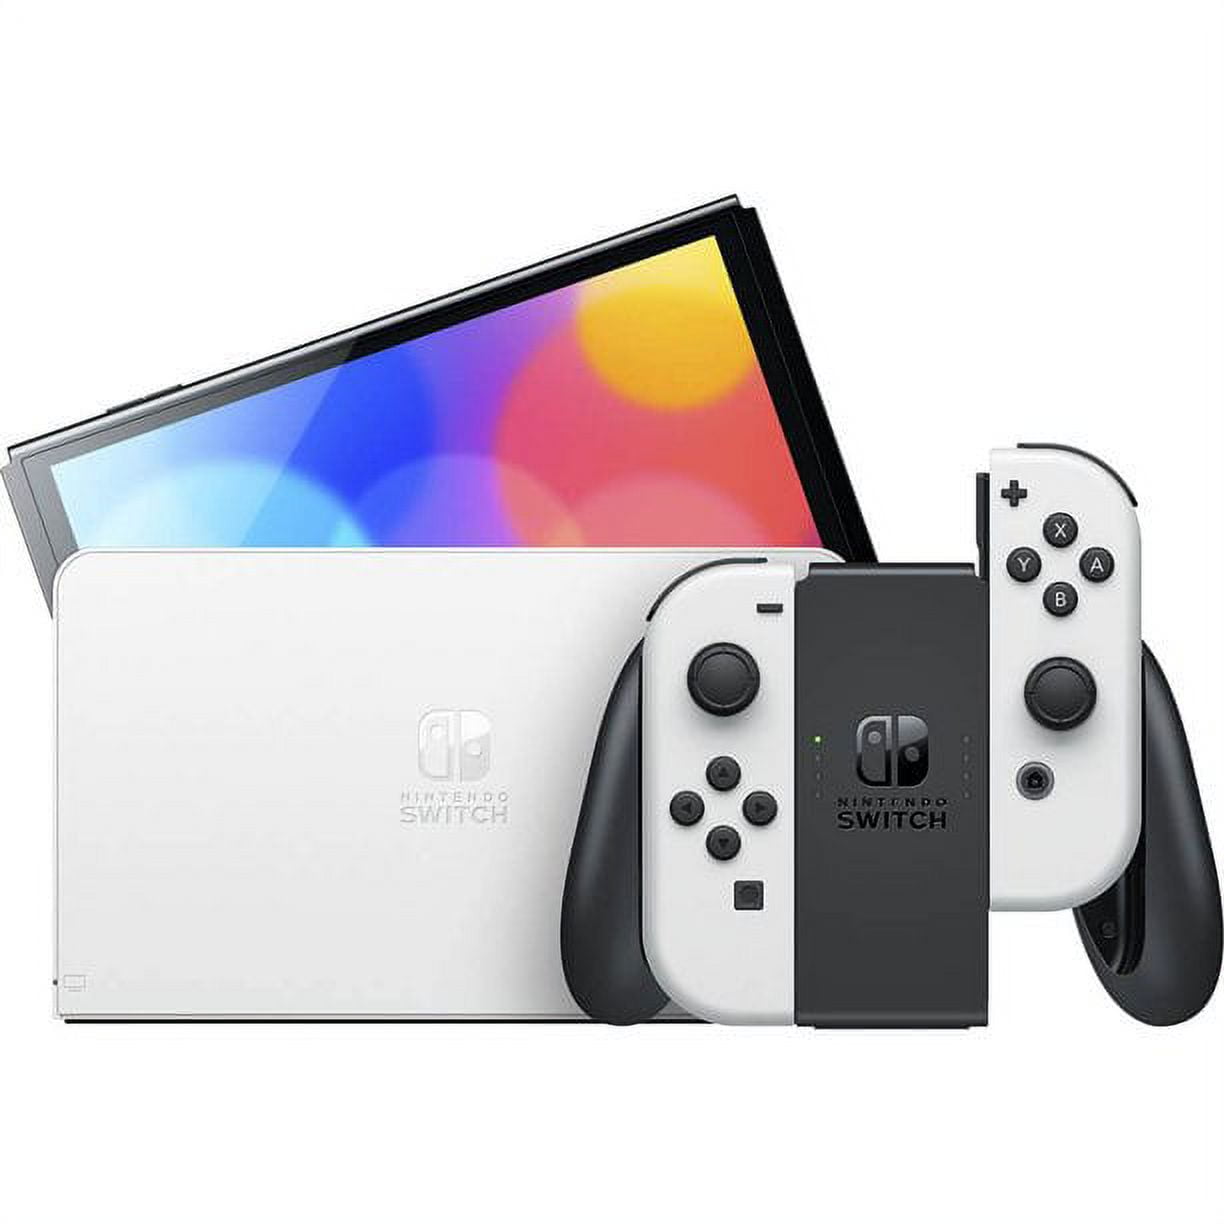 Newest Nintendo Switch Oled White Joy-Con Console With NSSDC 256gb